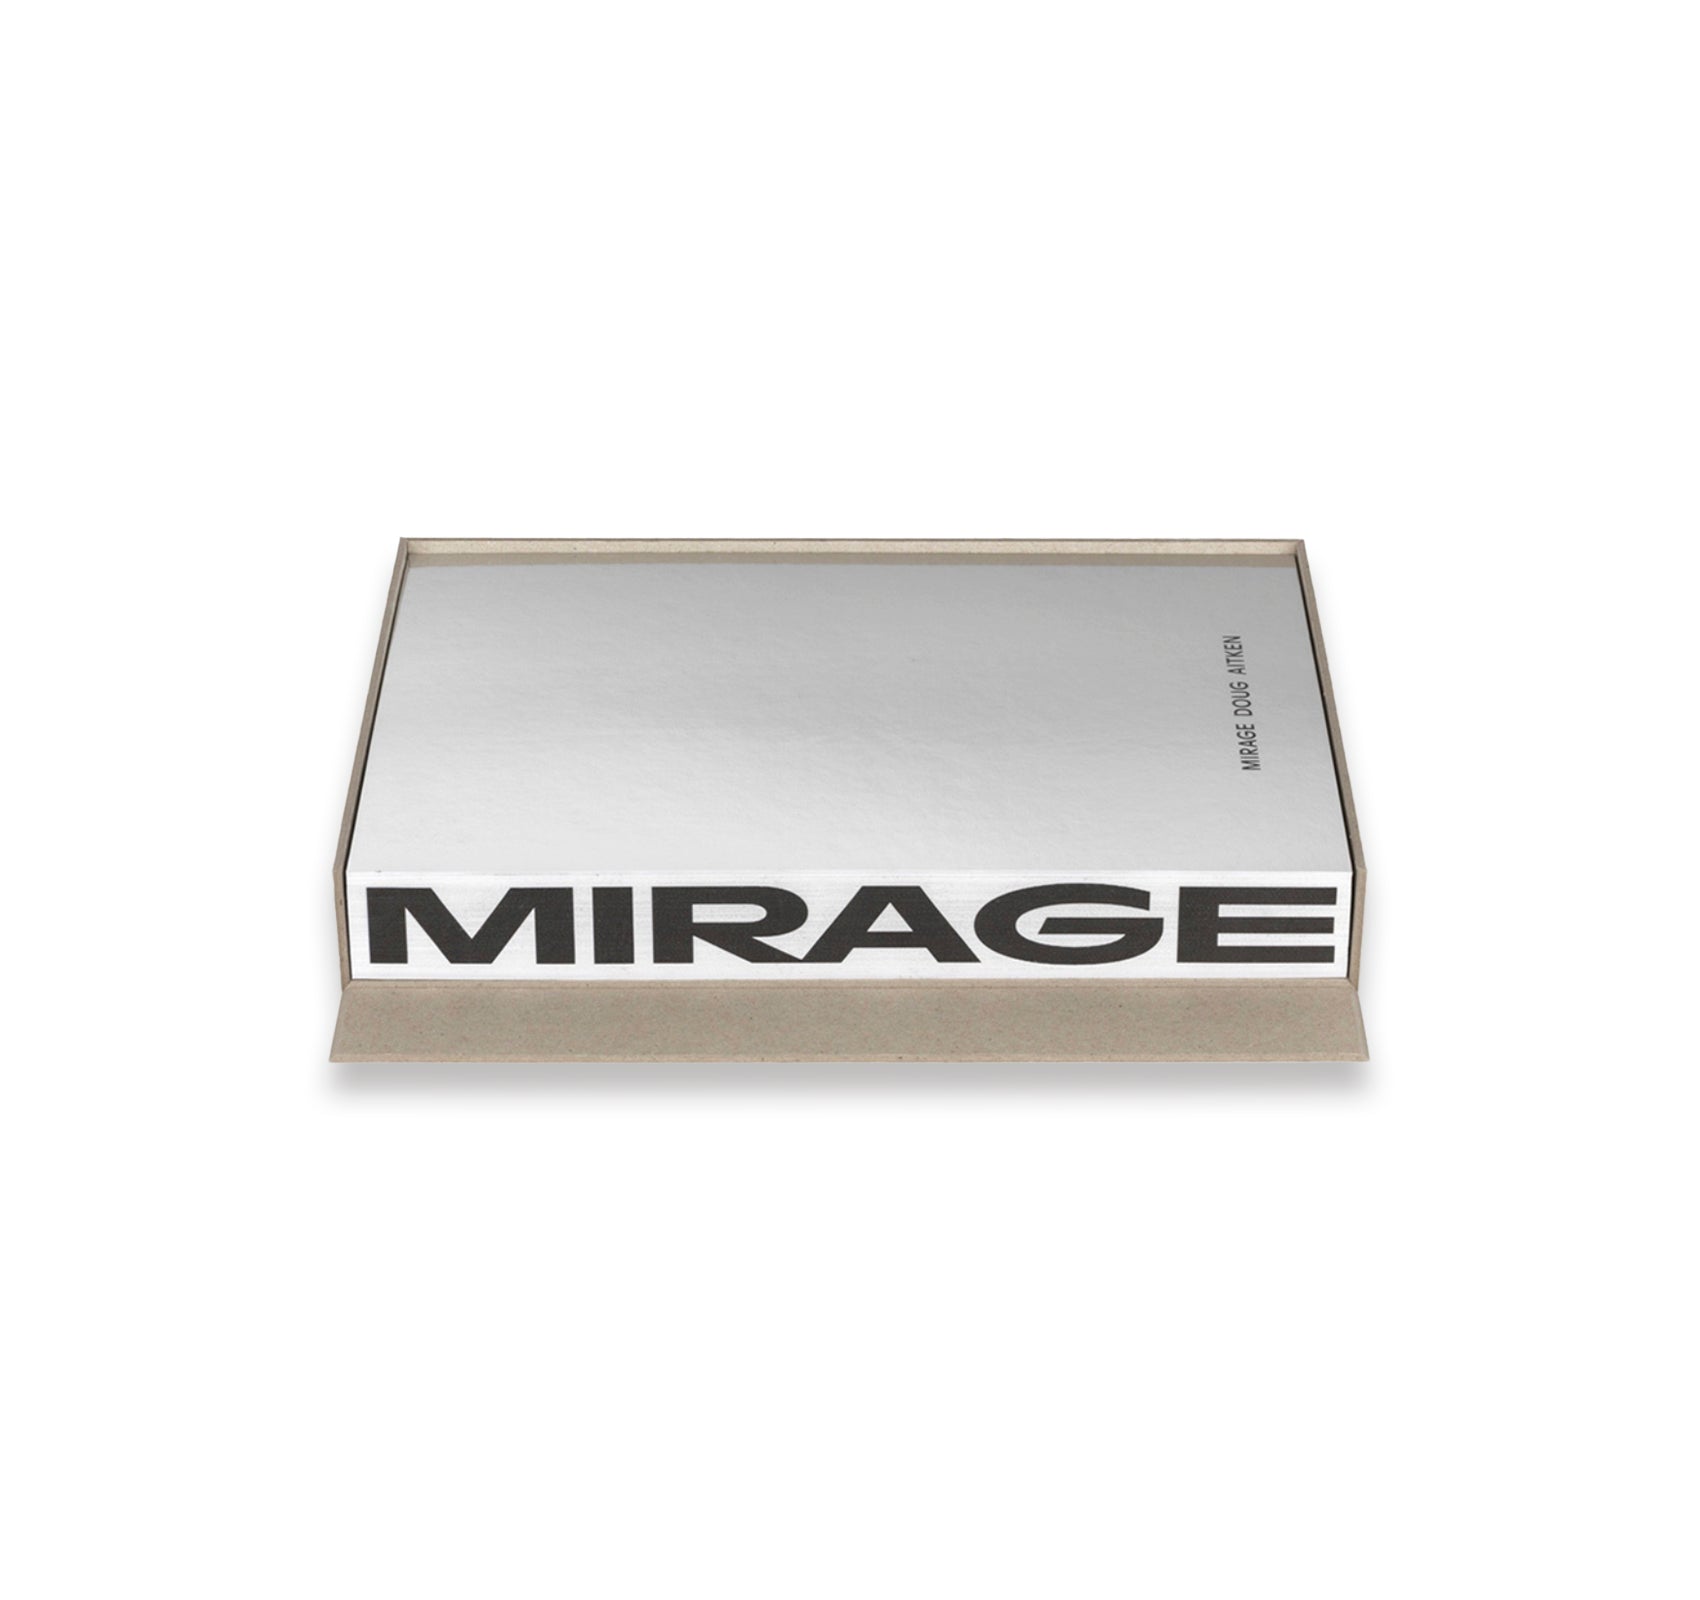 MIRAGE by Doug Aitken [SPECIAL EDITION]